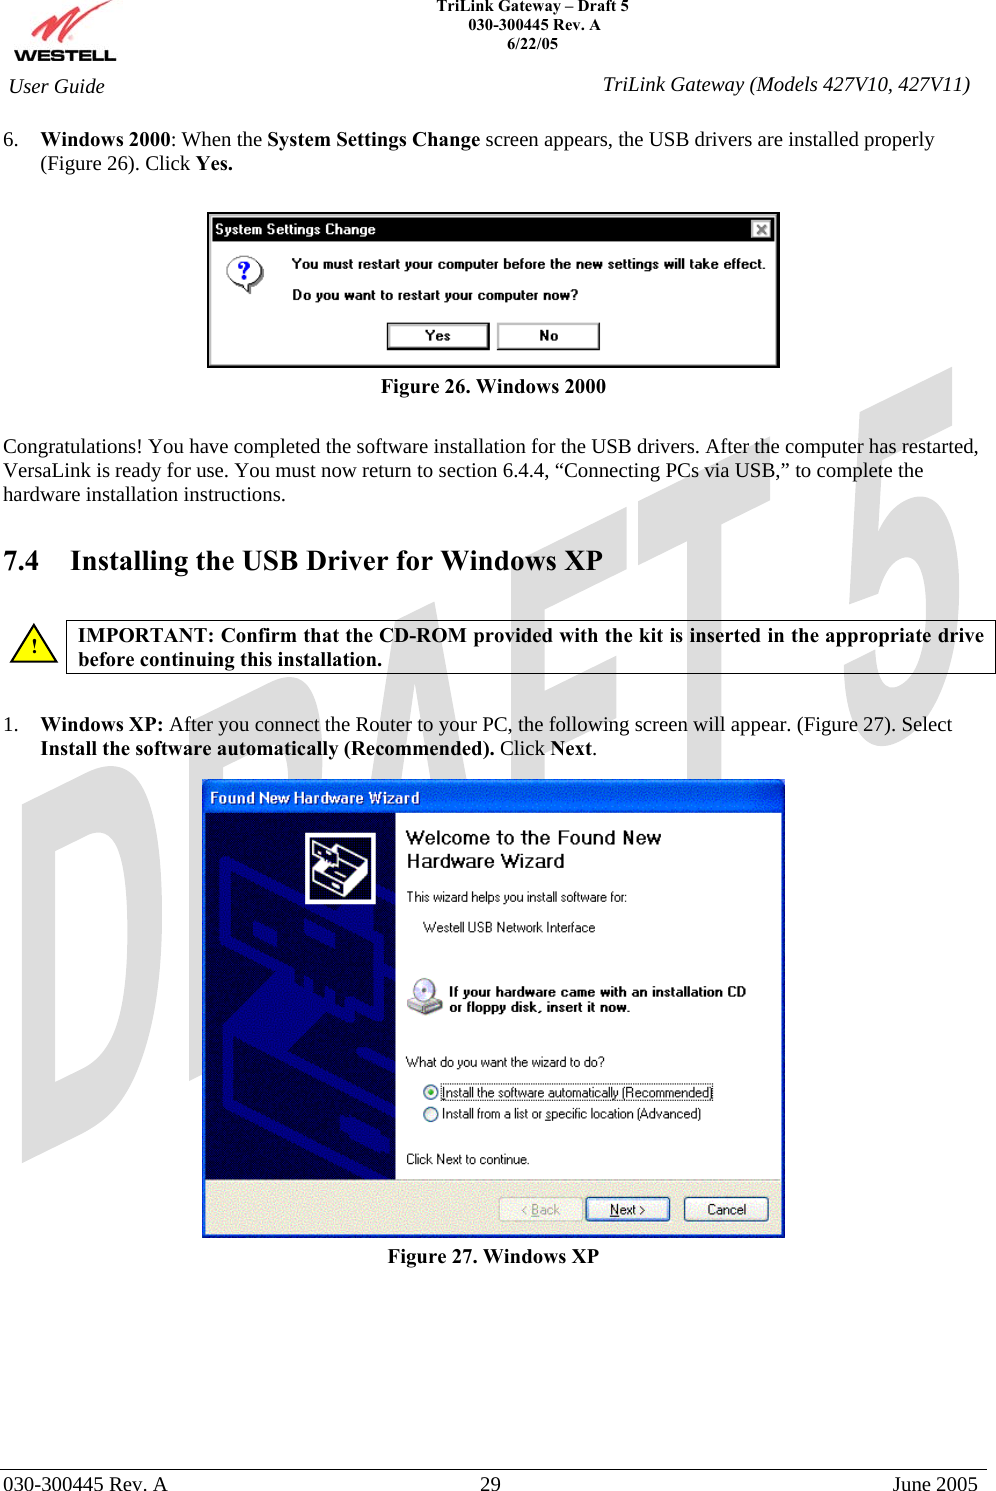    TriLink Gateway – Draft 5   030-300445 Rev. A 6/22/05   030-300445 Rev. A  29  June 2005  User Guide  TriLink Gateway (Models 427V10, 427V11)6.  Windows 2000: When the System Settings Change screen appears, the USB drivers are installed properly (Figure 26). Click Yes.   Figure 26. Windows 2000  Congratulations! You have completed the software installation for the USB drivers. After the computer has restarted, VersaLink is ready for use. You must now return to section 6.4.4, “Connecting PCs via USB,” to complete the hardware installation instructions.  7.4   Installing the USB Driver for Windows XP   IMPORTANT: Confirm that the CD-ROM provided with the kit is inserted in the appropriate drive before continuing this installation.    1.  Windows XP: After you connect the Router to your PC, the following screen will appear. (Figure 27). Select Install the software automatically (Recommended). Click Next.    Figure 27. Windows XP          ! 